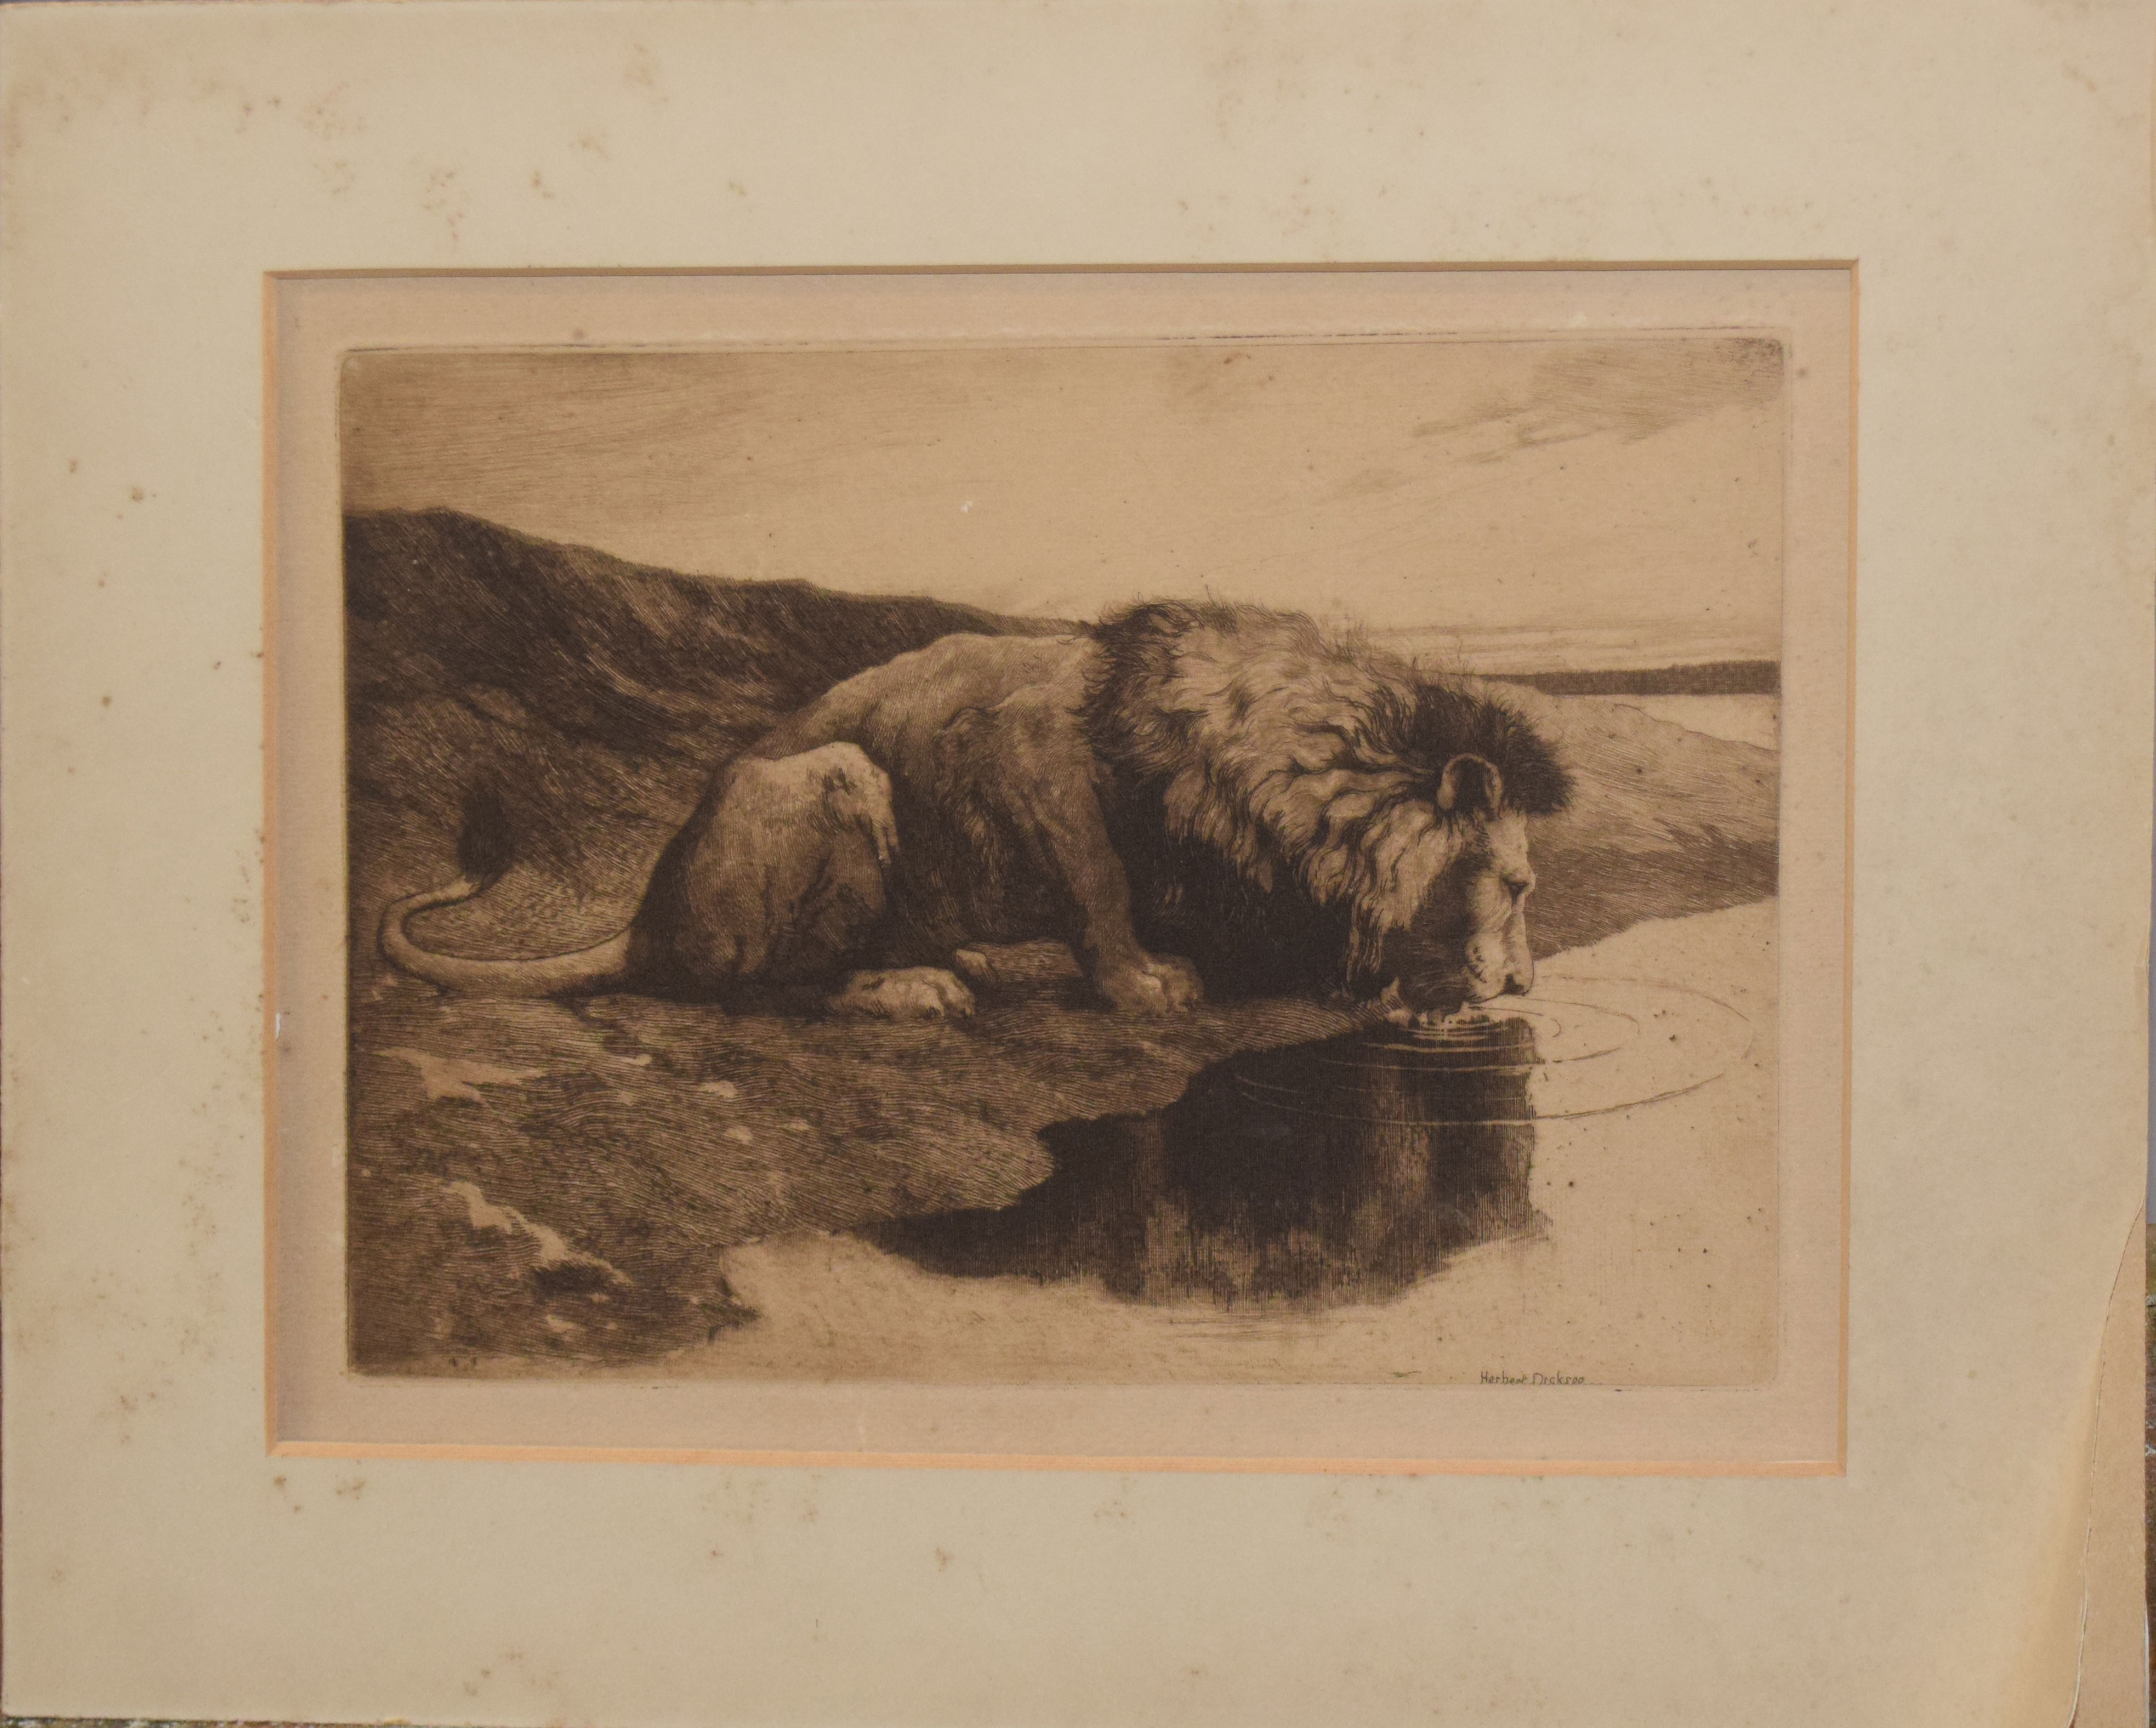 After Herbert Dicksee, Lion drinking from a pool, black and white etching, 18 x 25cm, mounted but